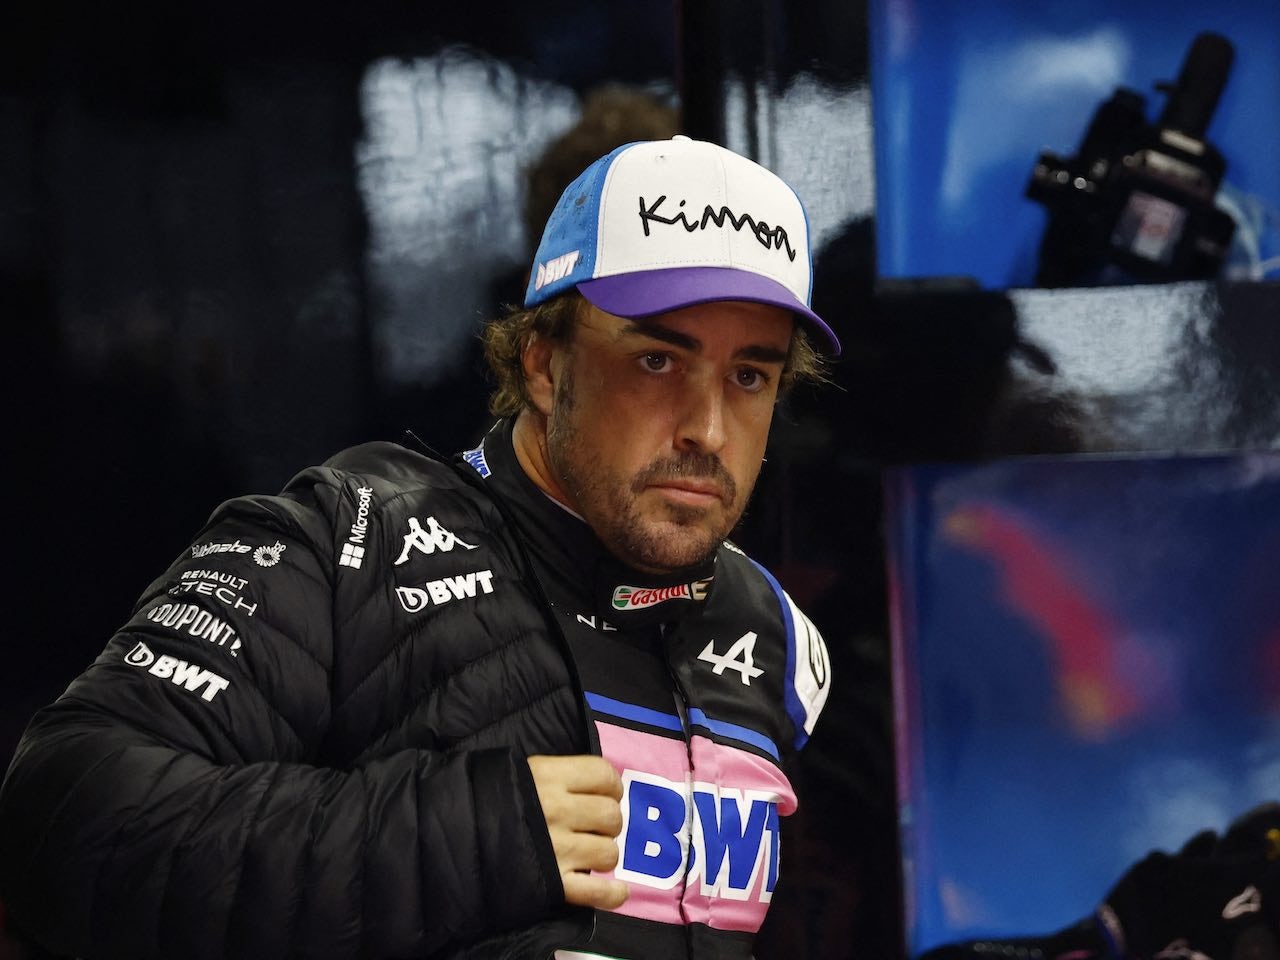 Thursday 'an important day' for F1 - Alonso